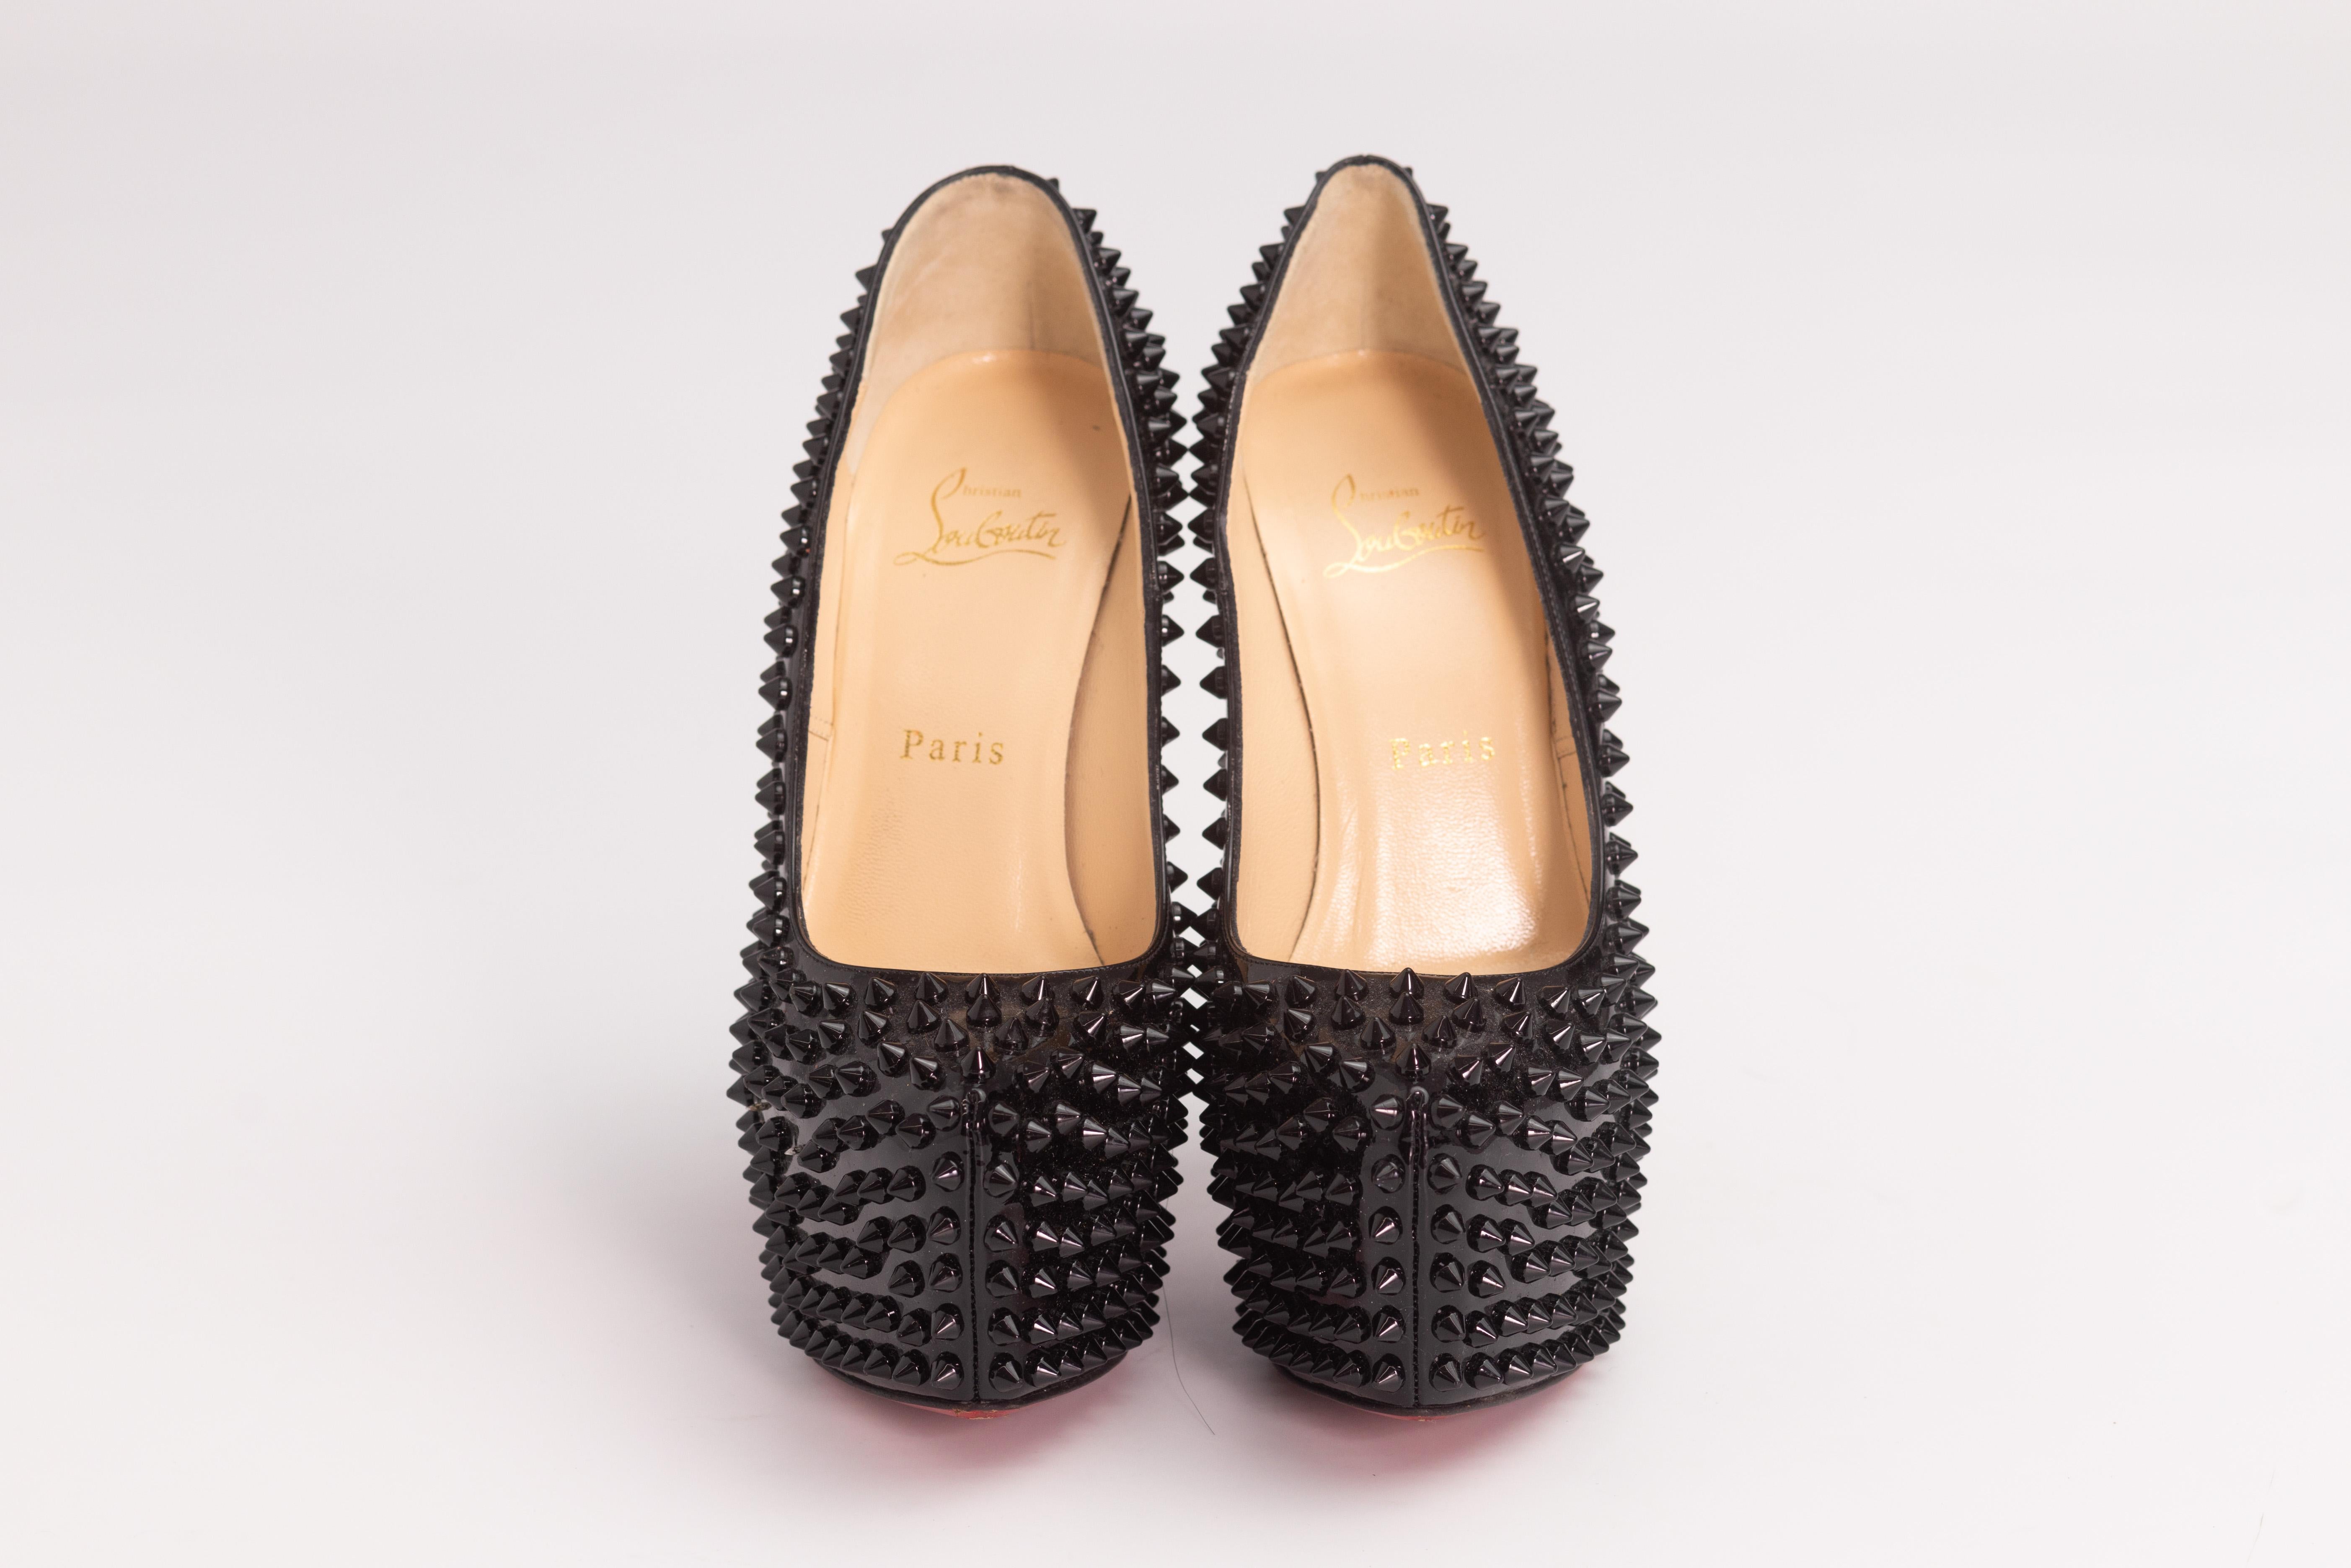 Christian Louboutin Black Skike Platforms Daffodile Heels (EU 37) In Good Condition For Sale In Montreal, Quebec